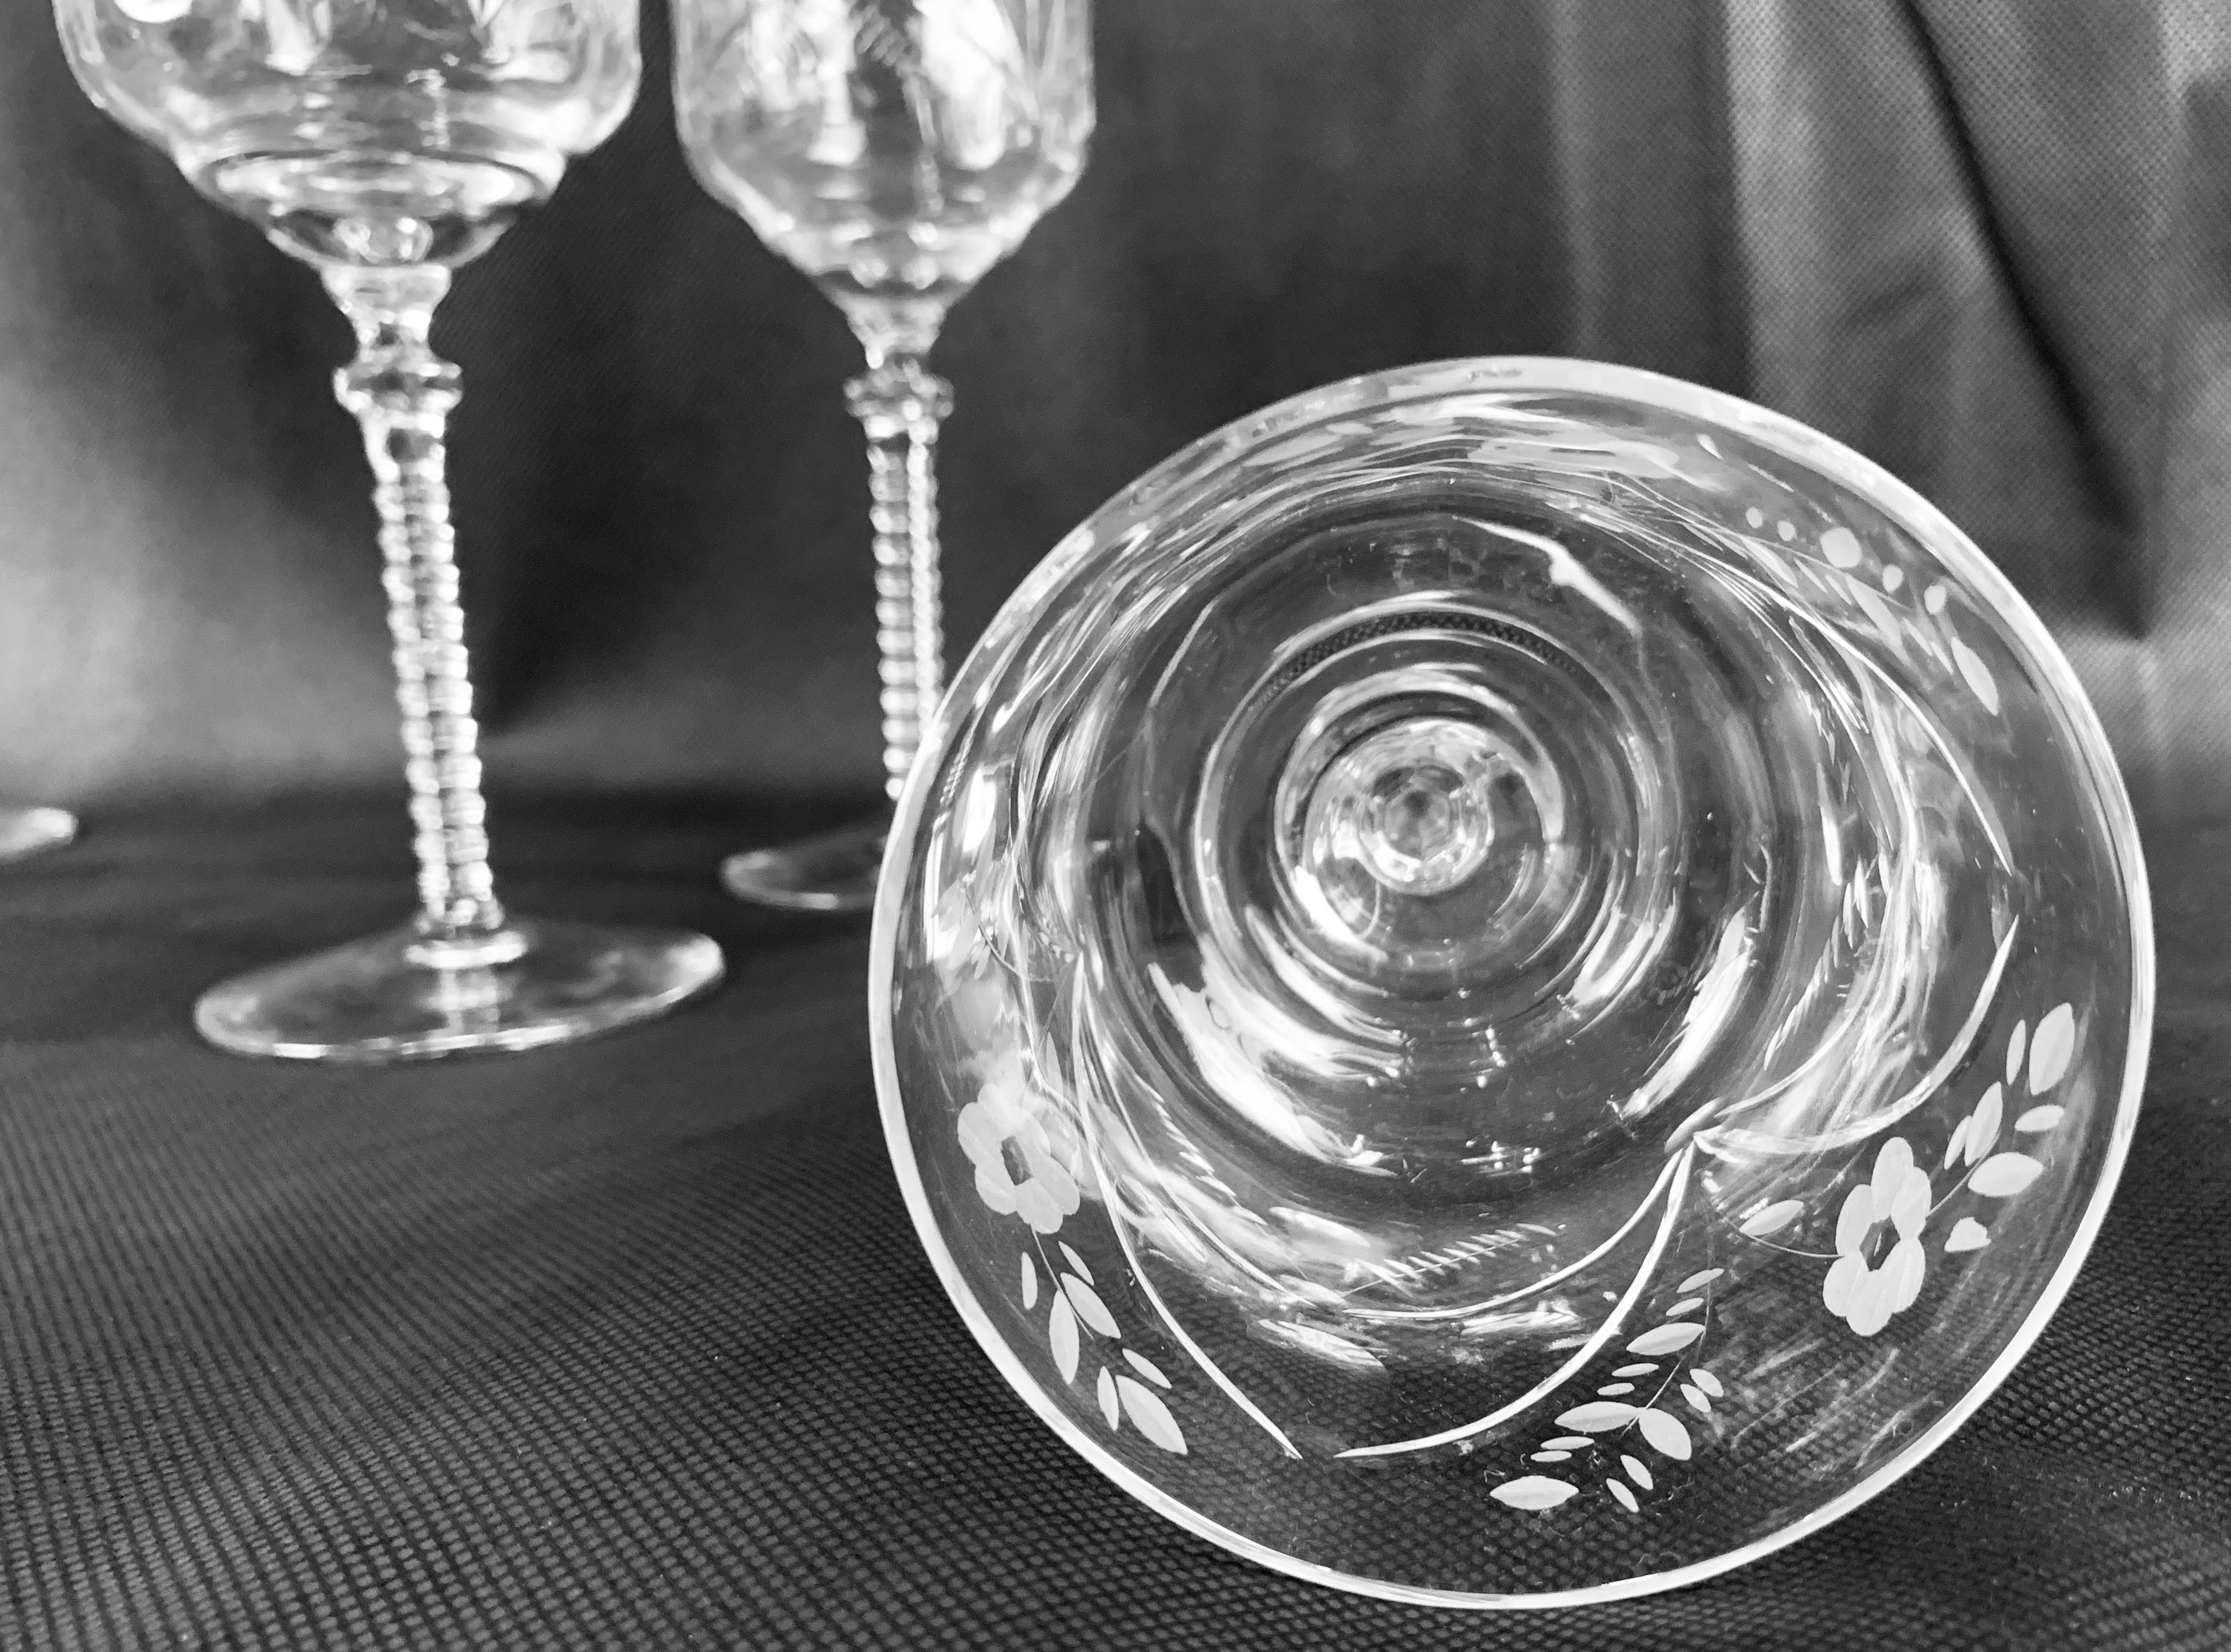 Etched Rock Sharpe's Wine Glasses in the 